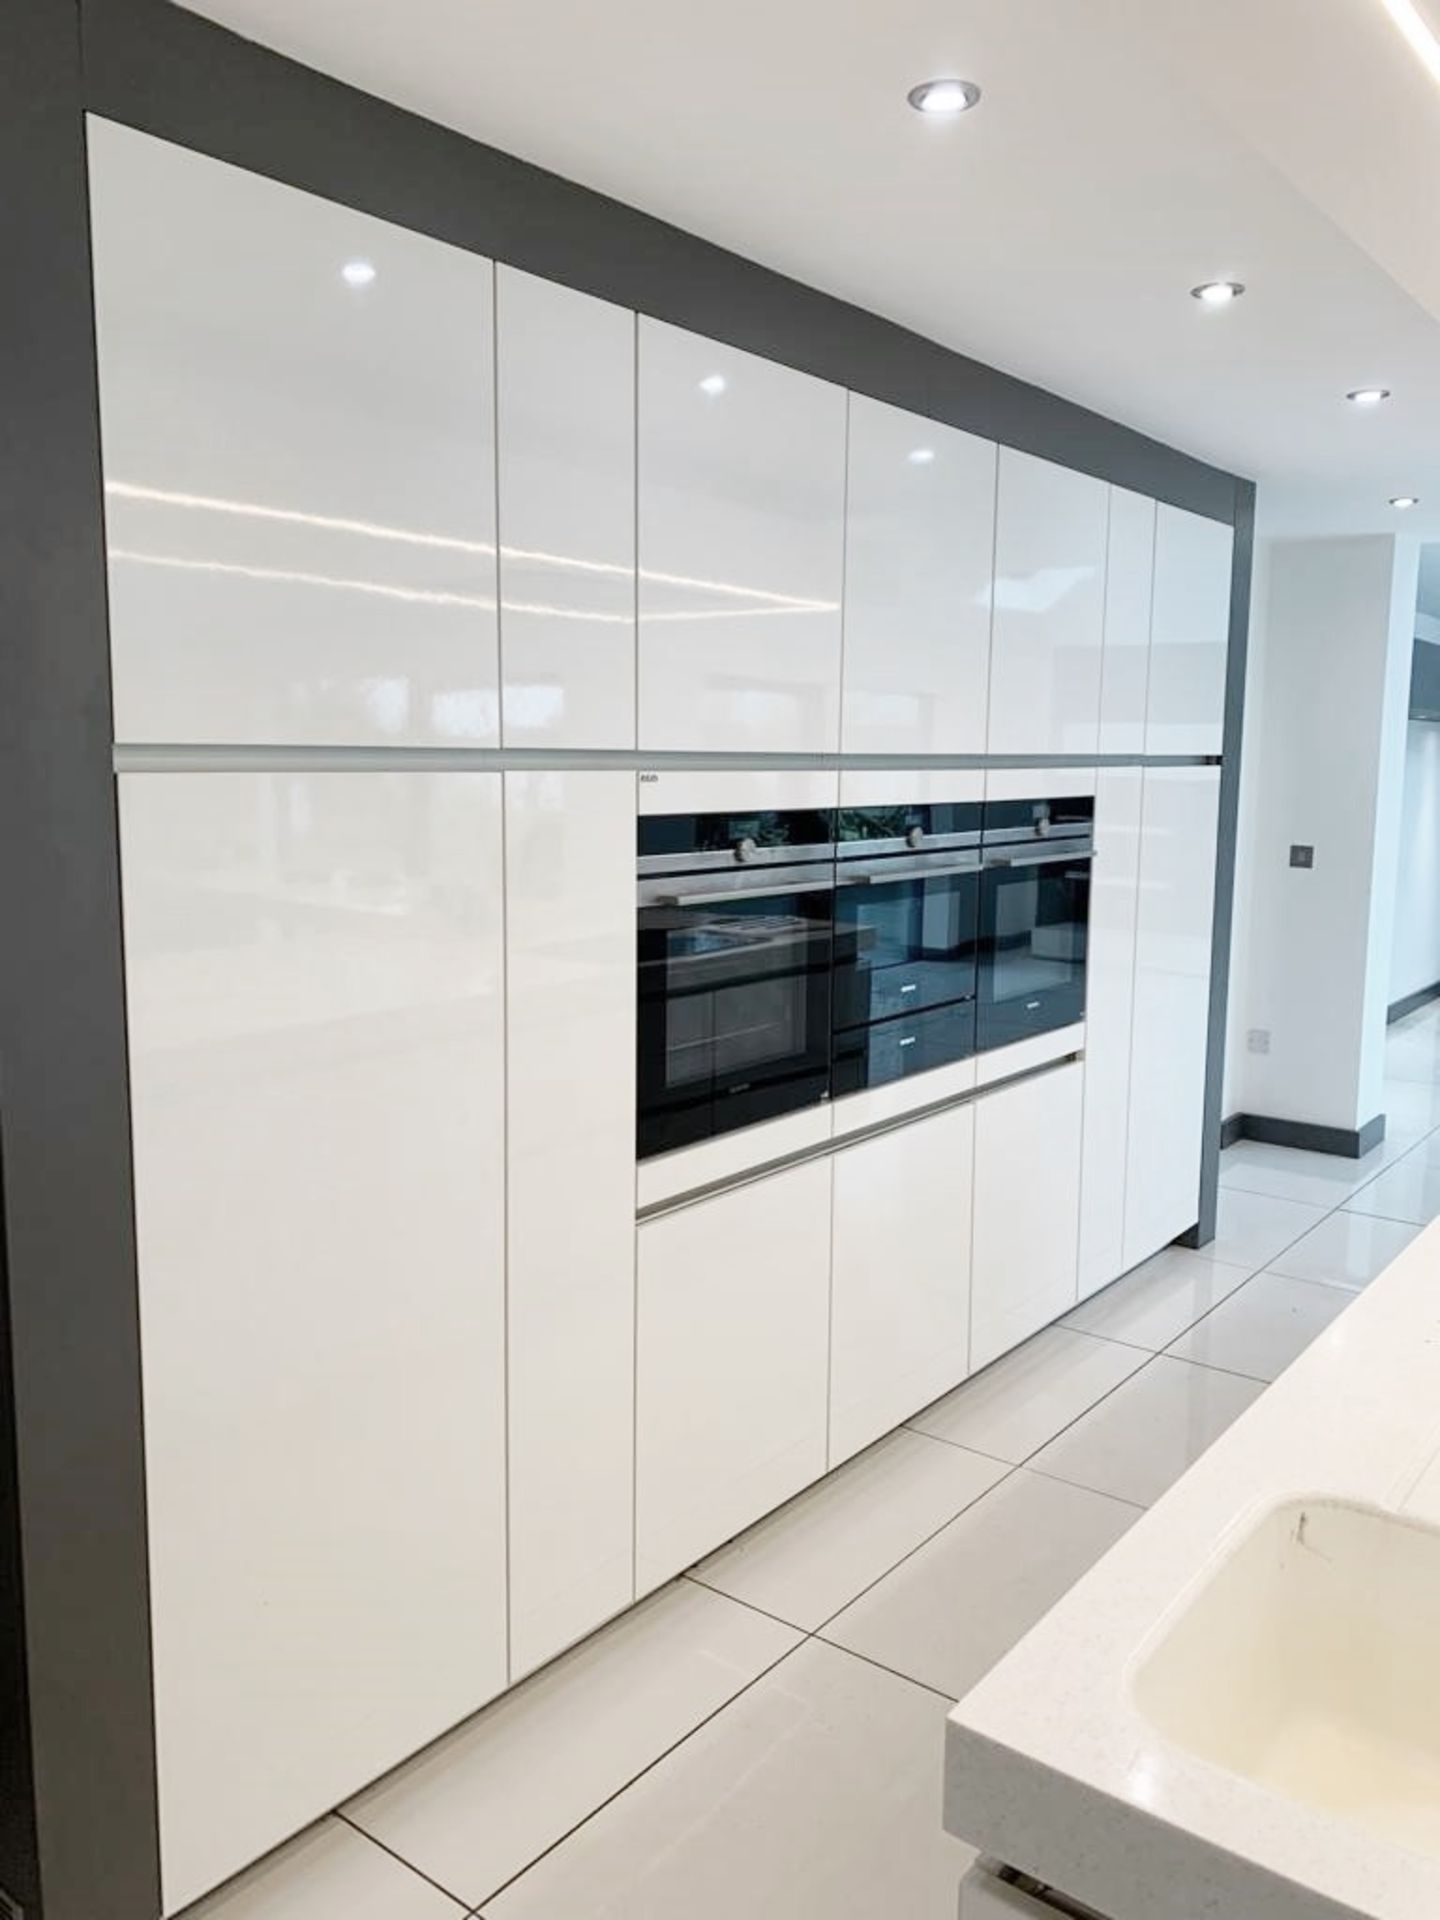 1 x SieMatic Contemporary Fitted Kitchen With Branded Appliances, Central Island + Corian Worktops - Image 100 of 100